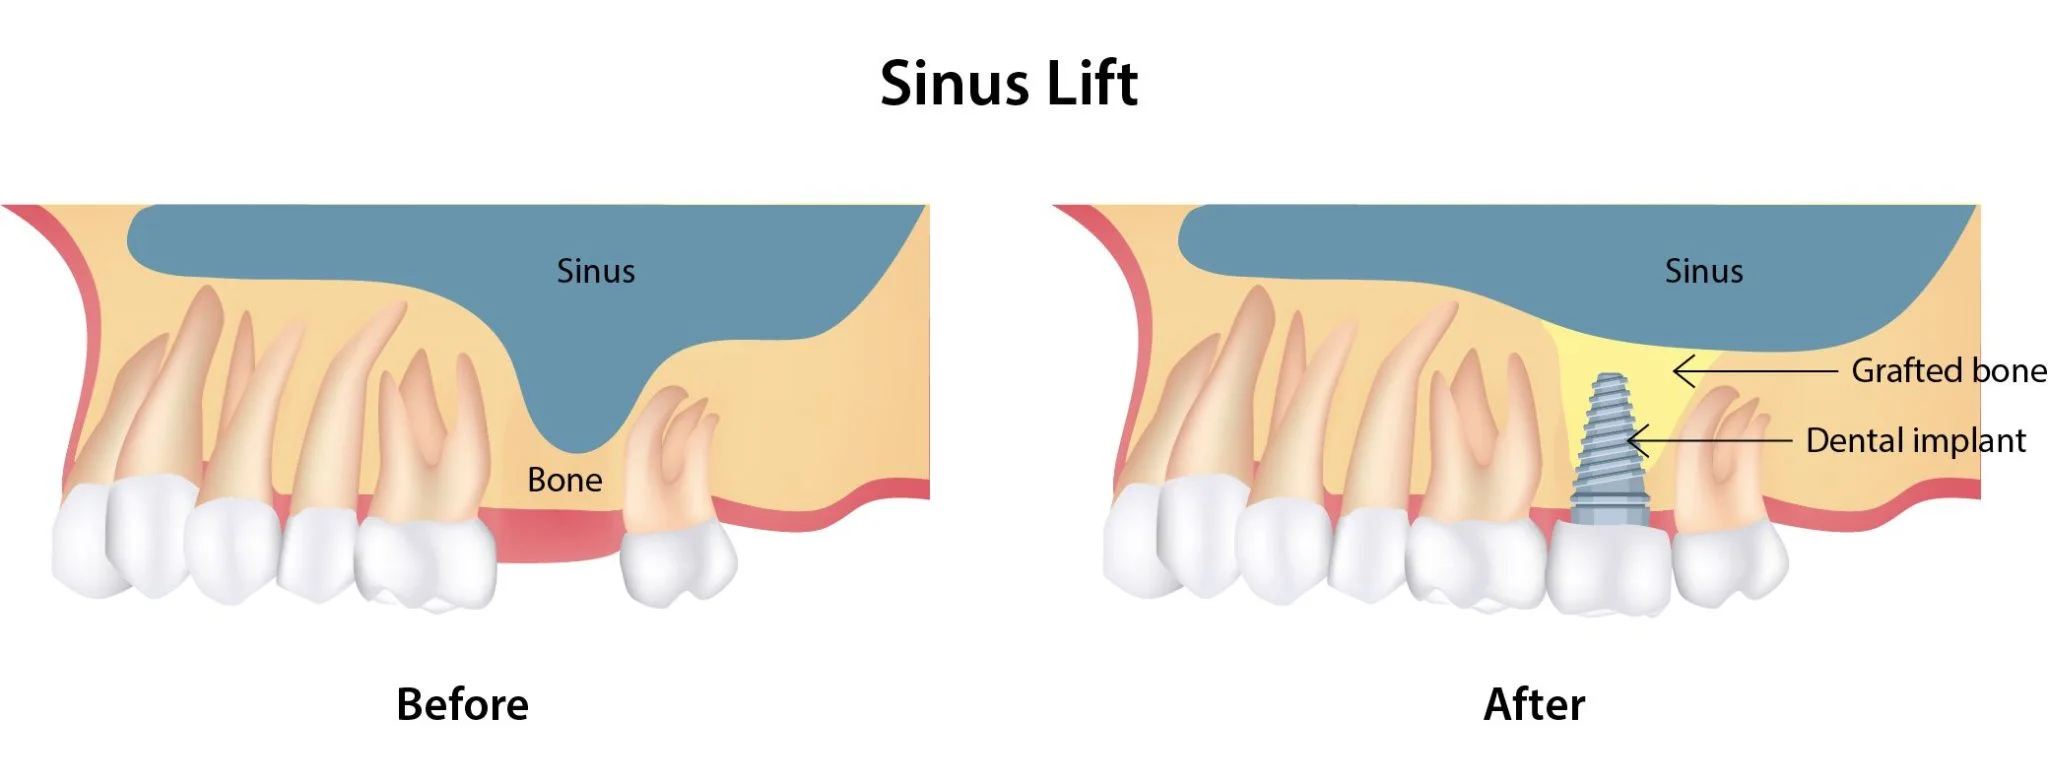 Can Dental Implants Affect Sinuses?